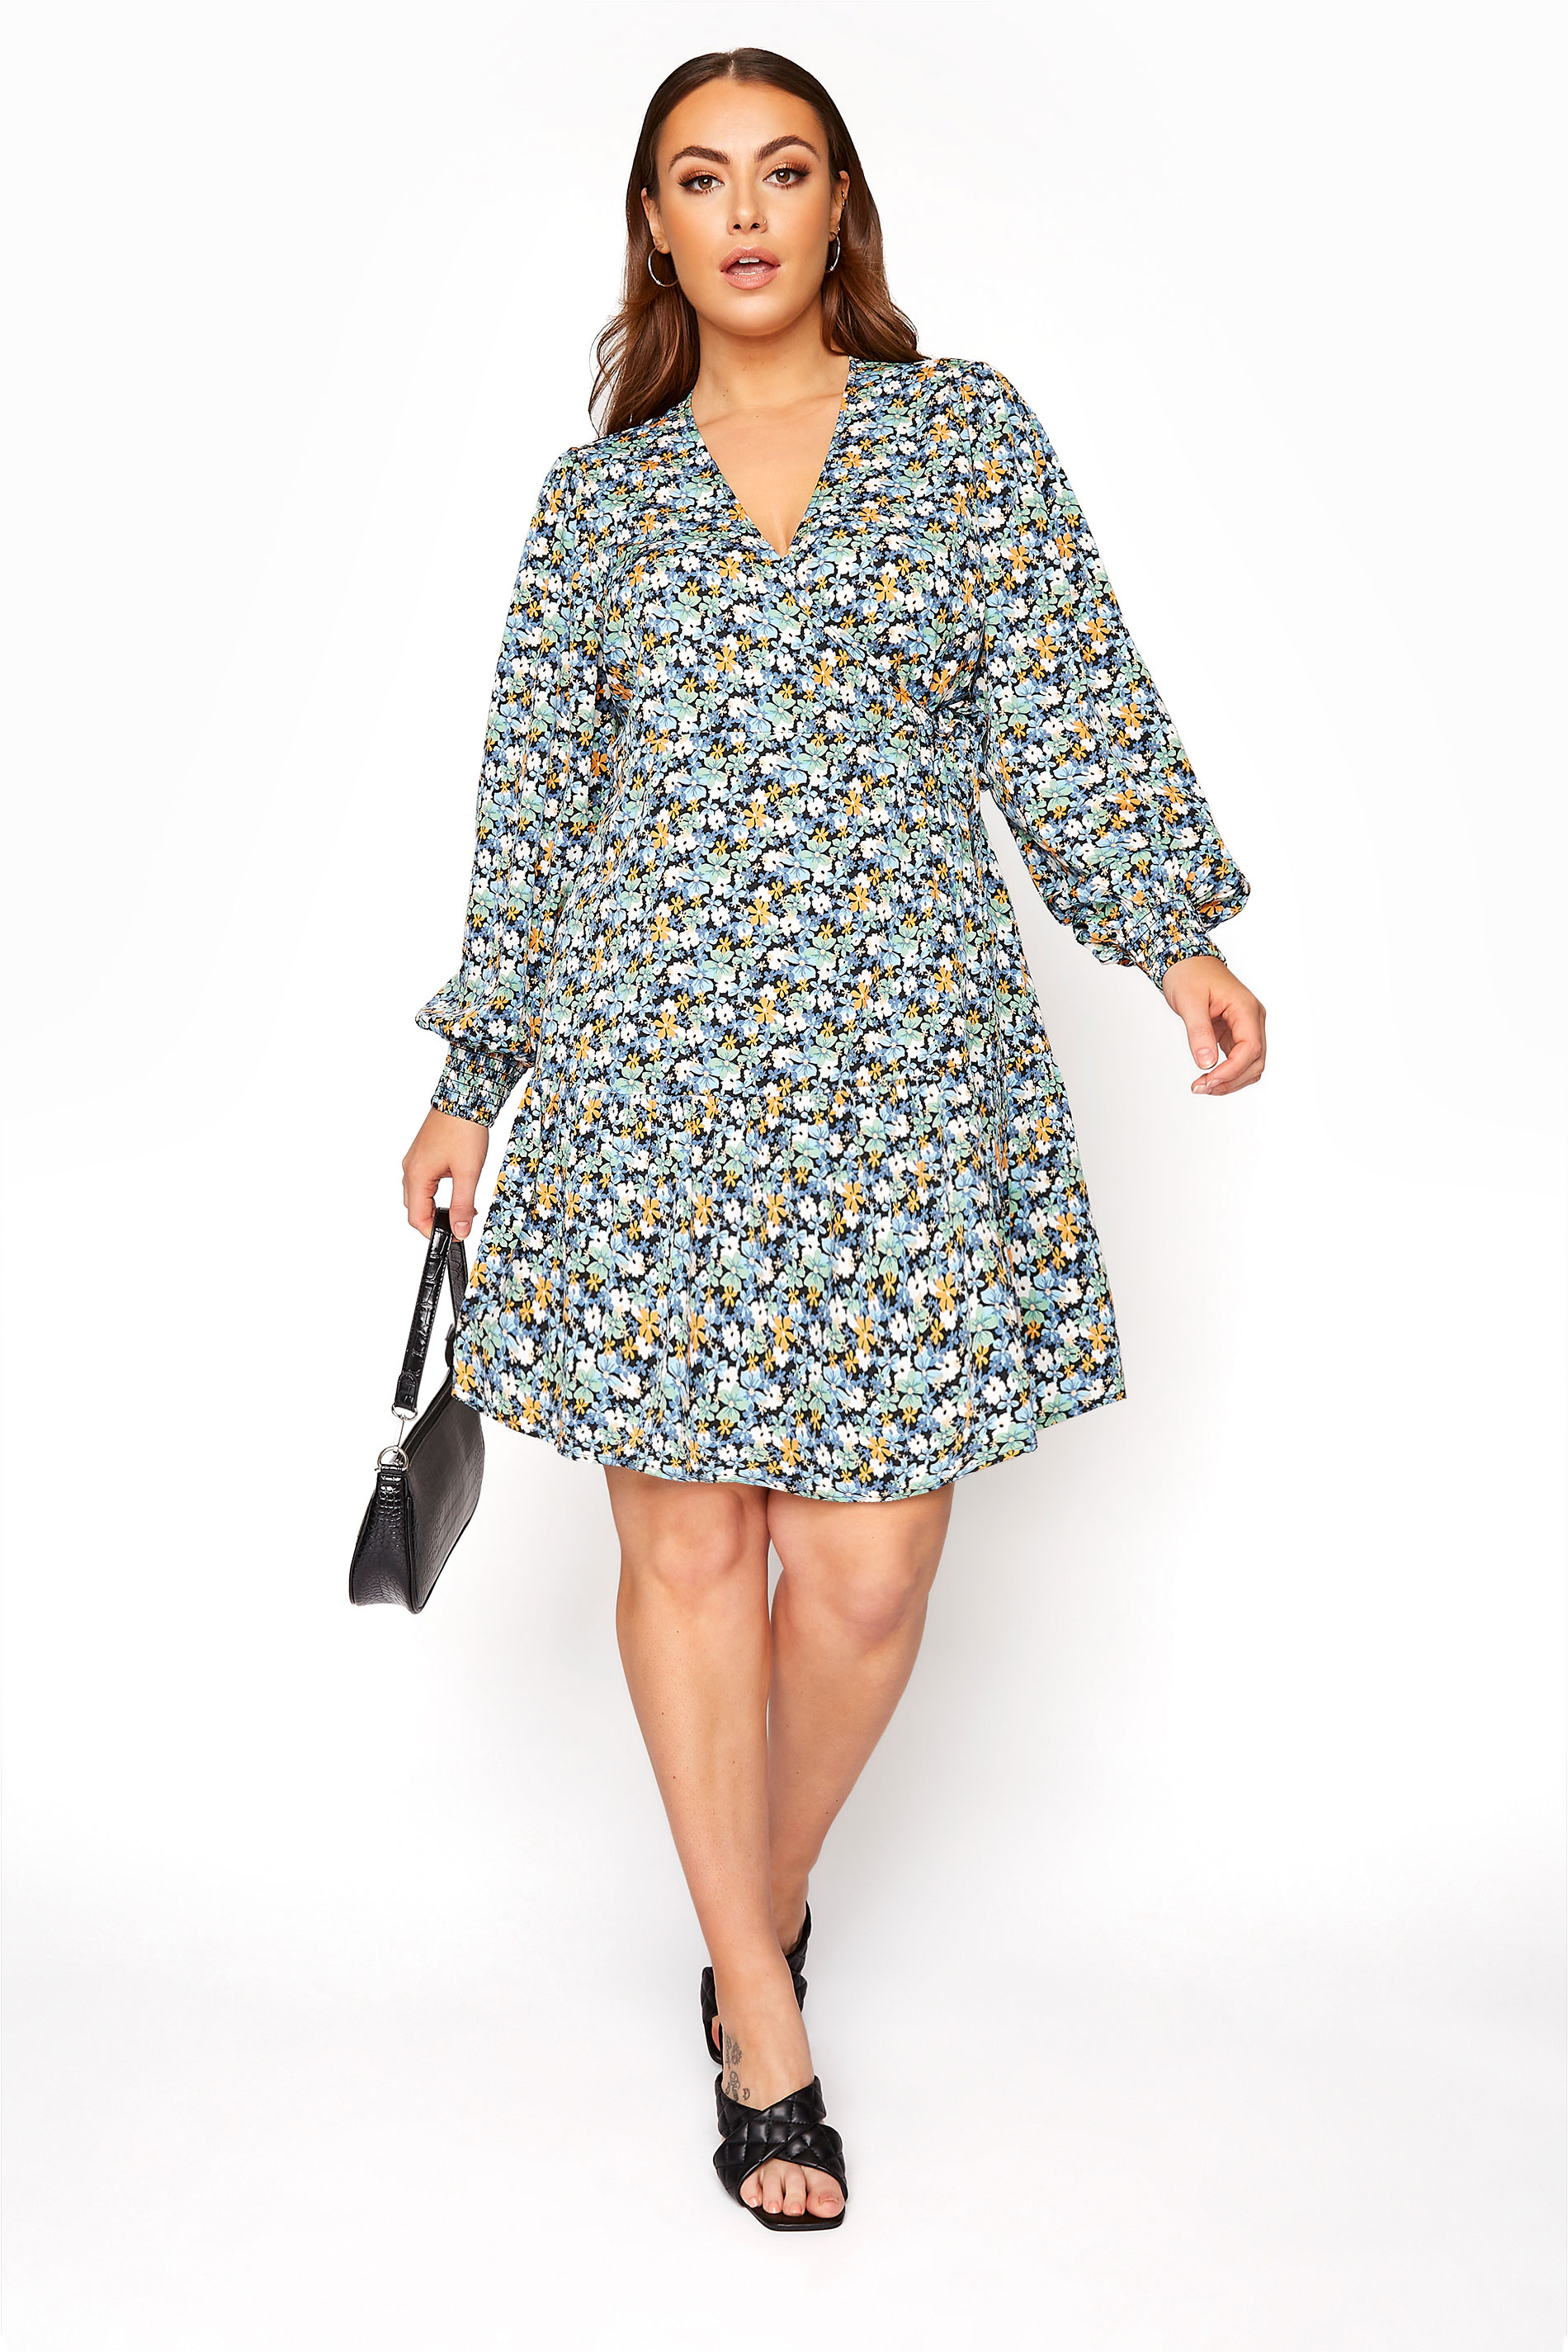 LIMITED COLLECTION Blue Floral Wrap Mini Dress | Yours Clothing